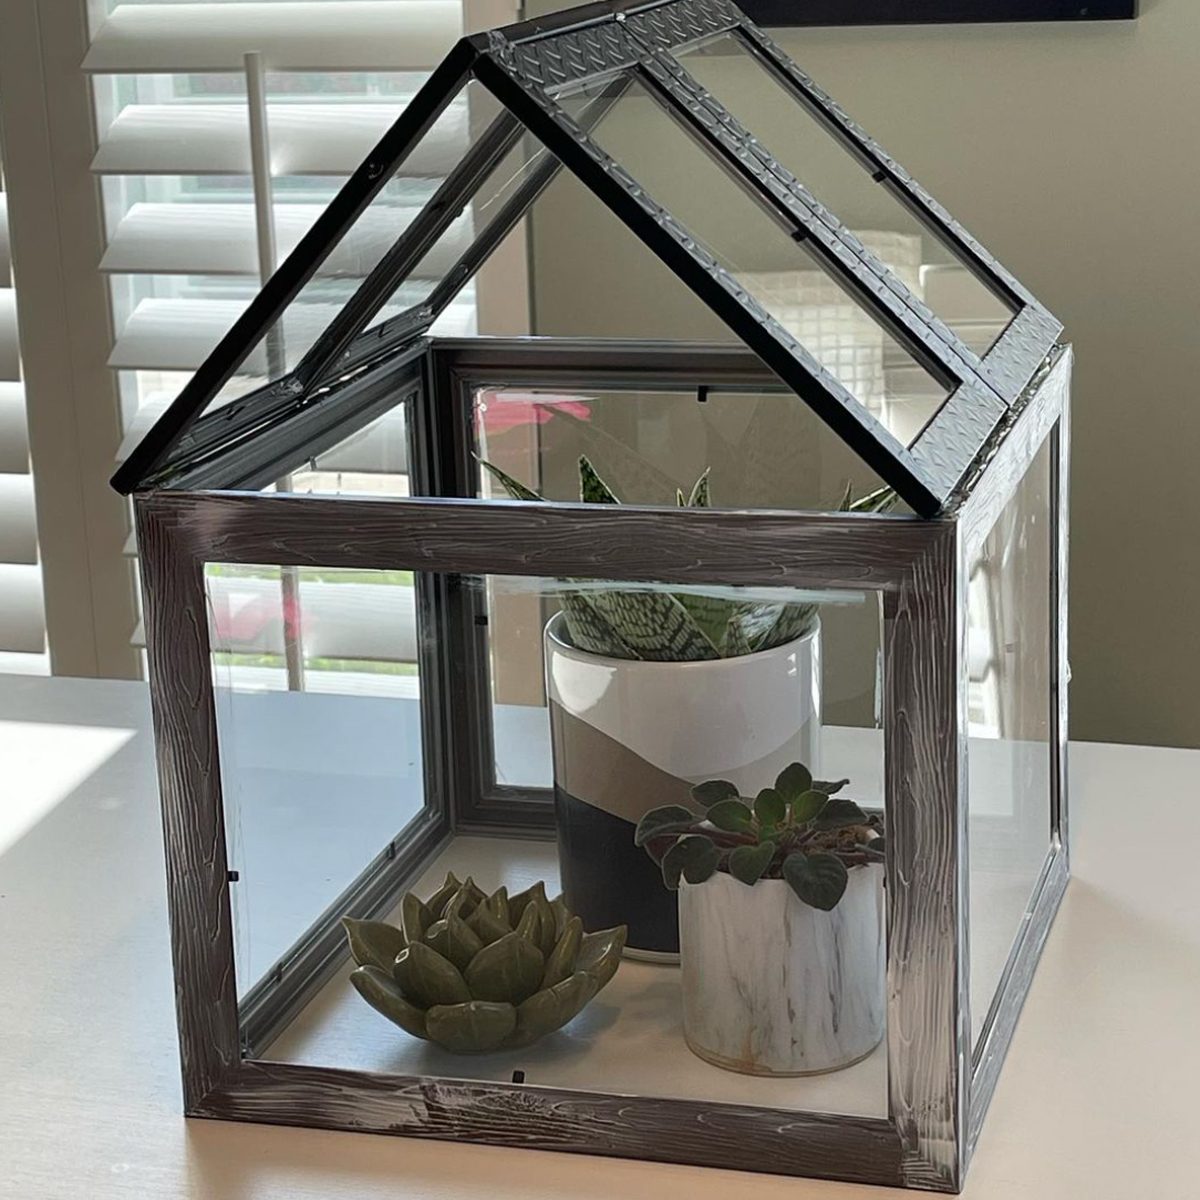 Picture Frame Greenhouse Courtesy @tsteffes Via Instagram